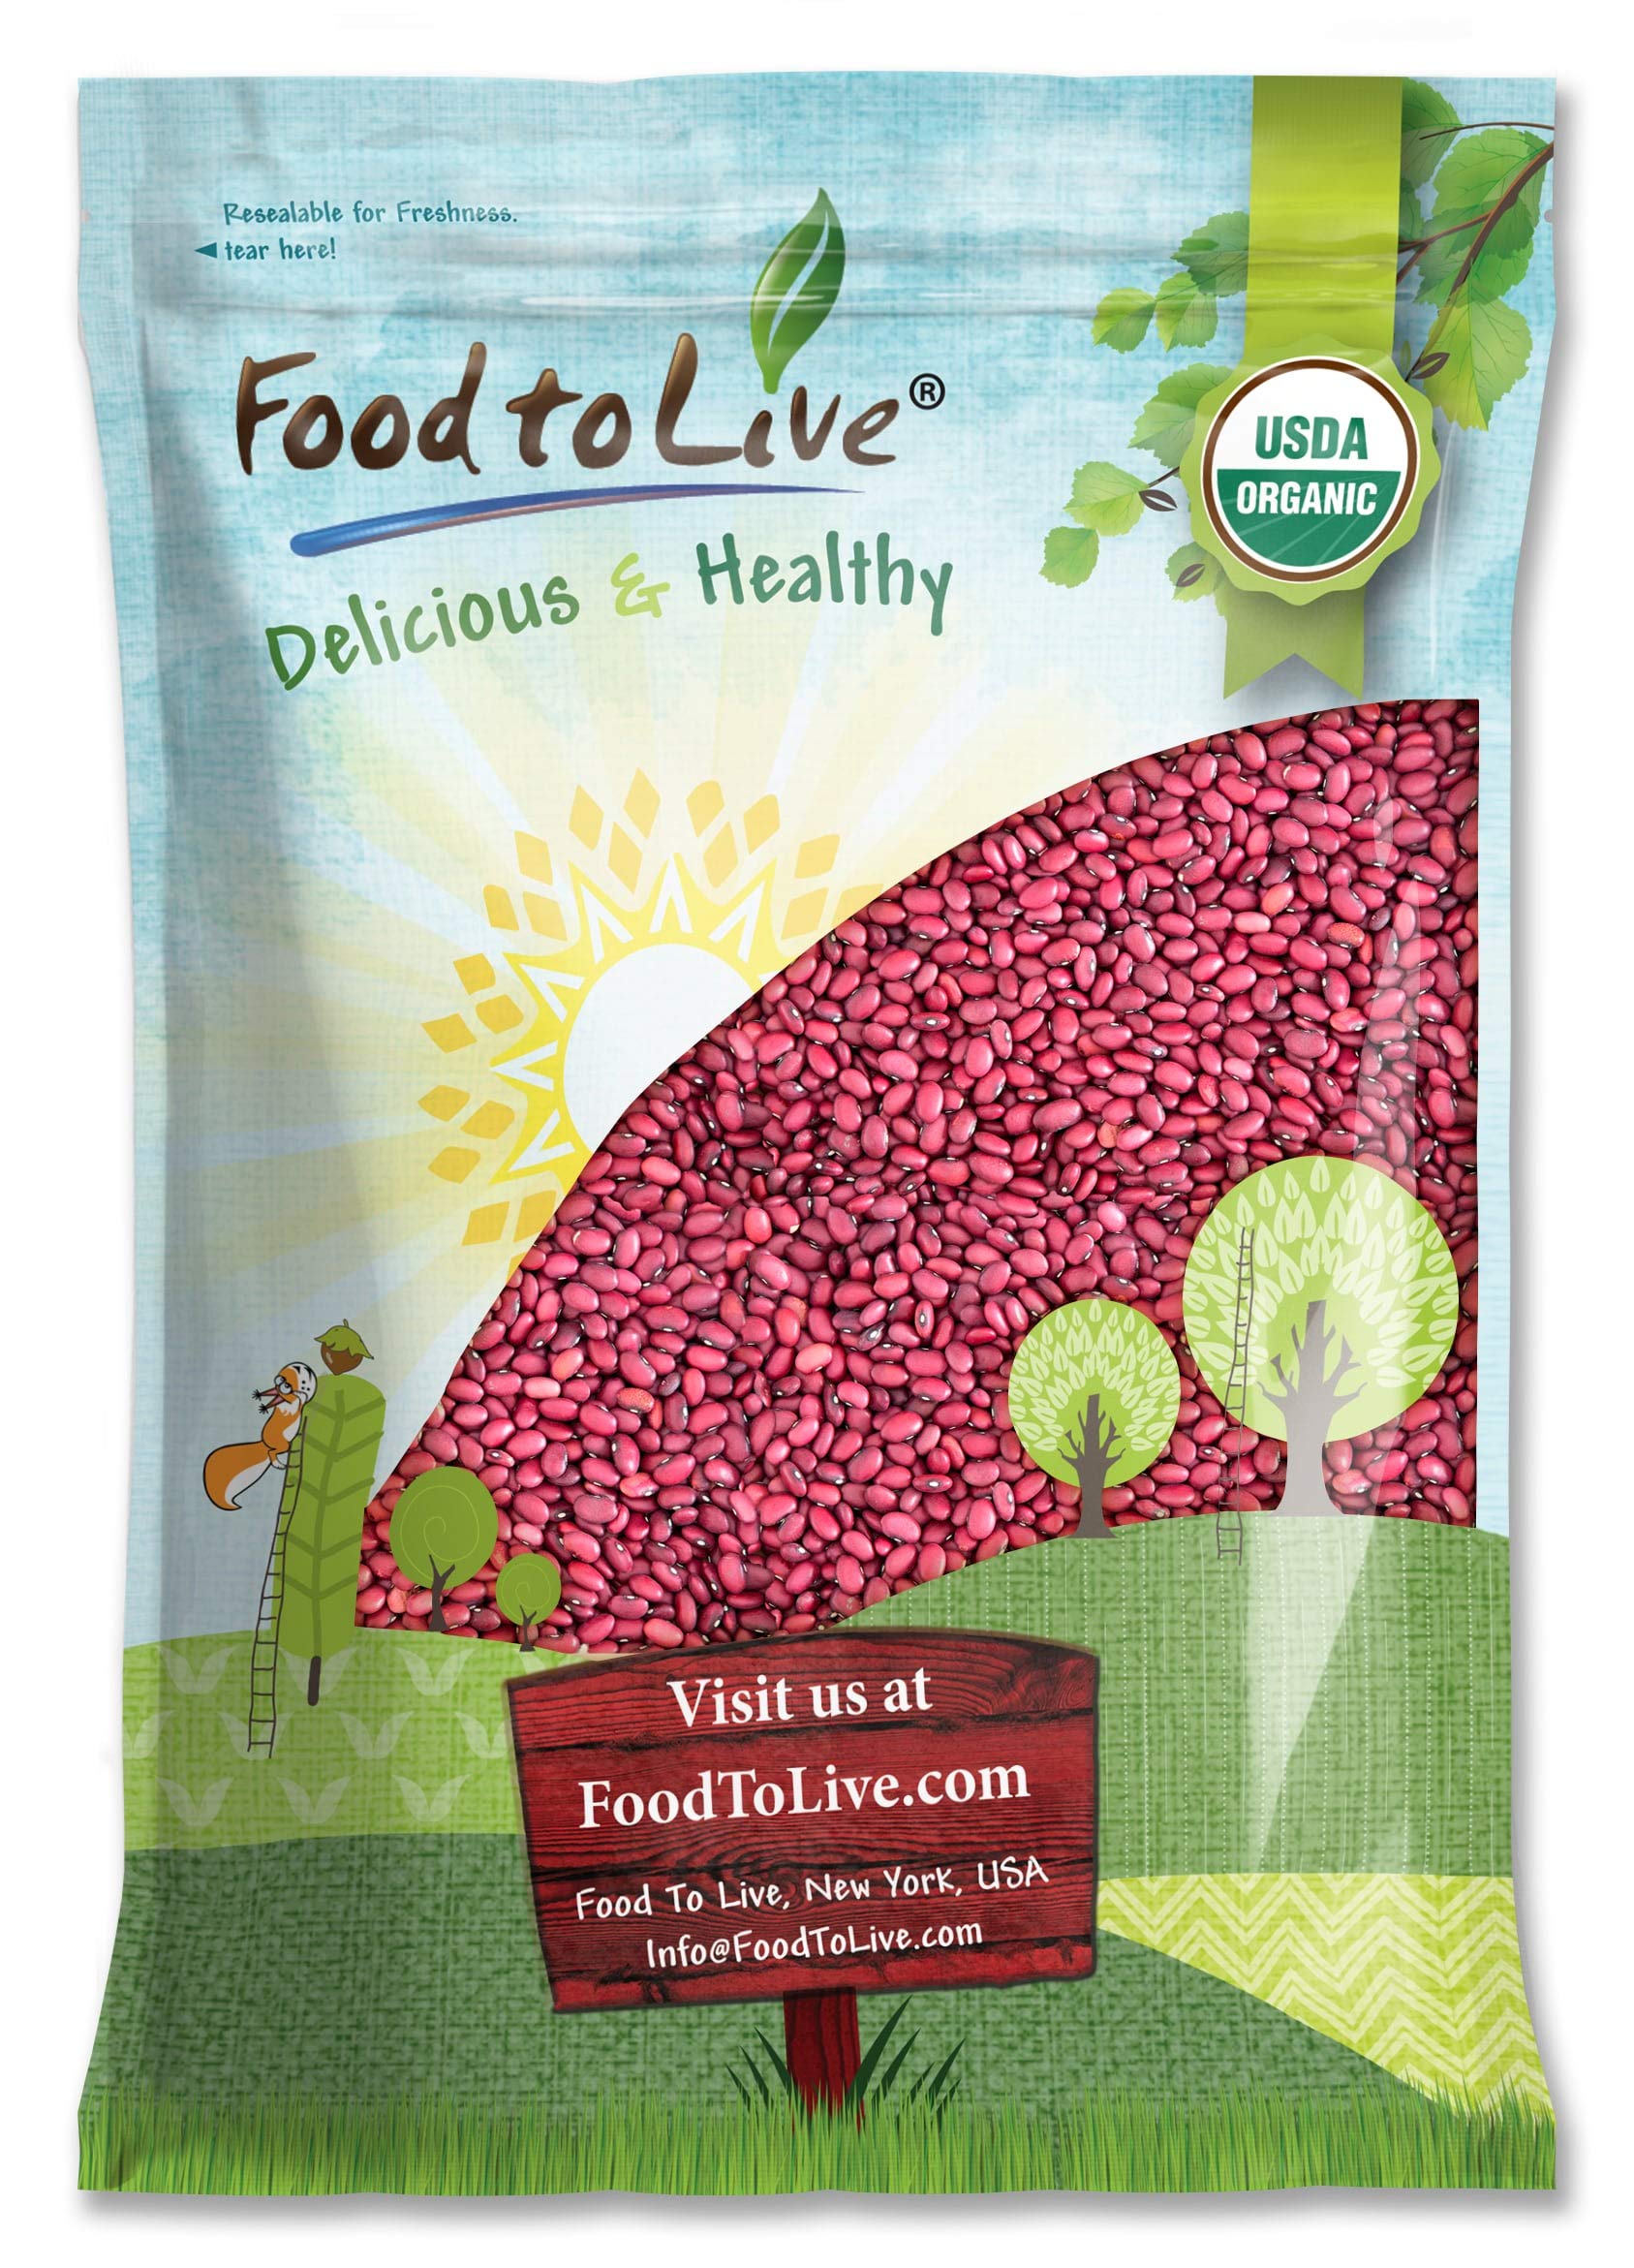 Organic Small Red Chili Beans, 5 Pounds - Non-GMO, Kosher, Vegan, Dry, Raw, Sproutable, Non-Irradiated, Vegan, Bulk, Product of the USA